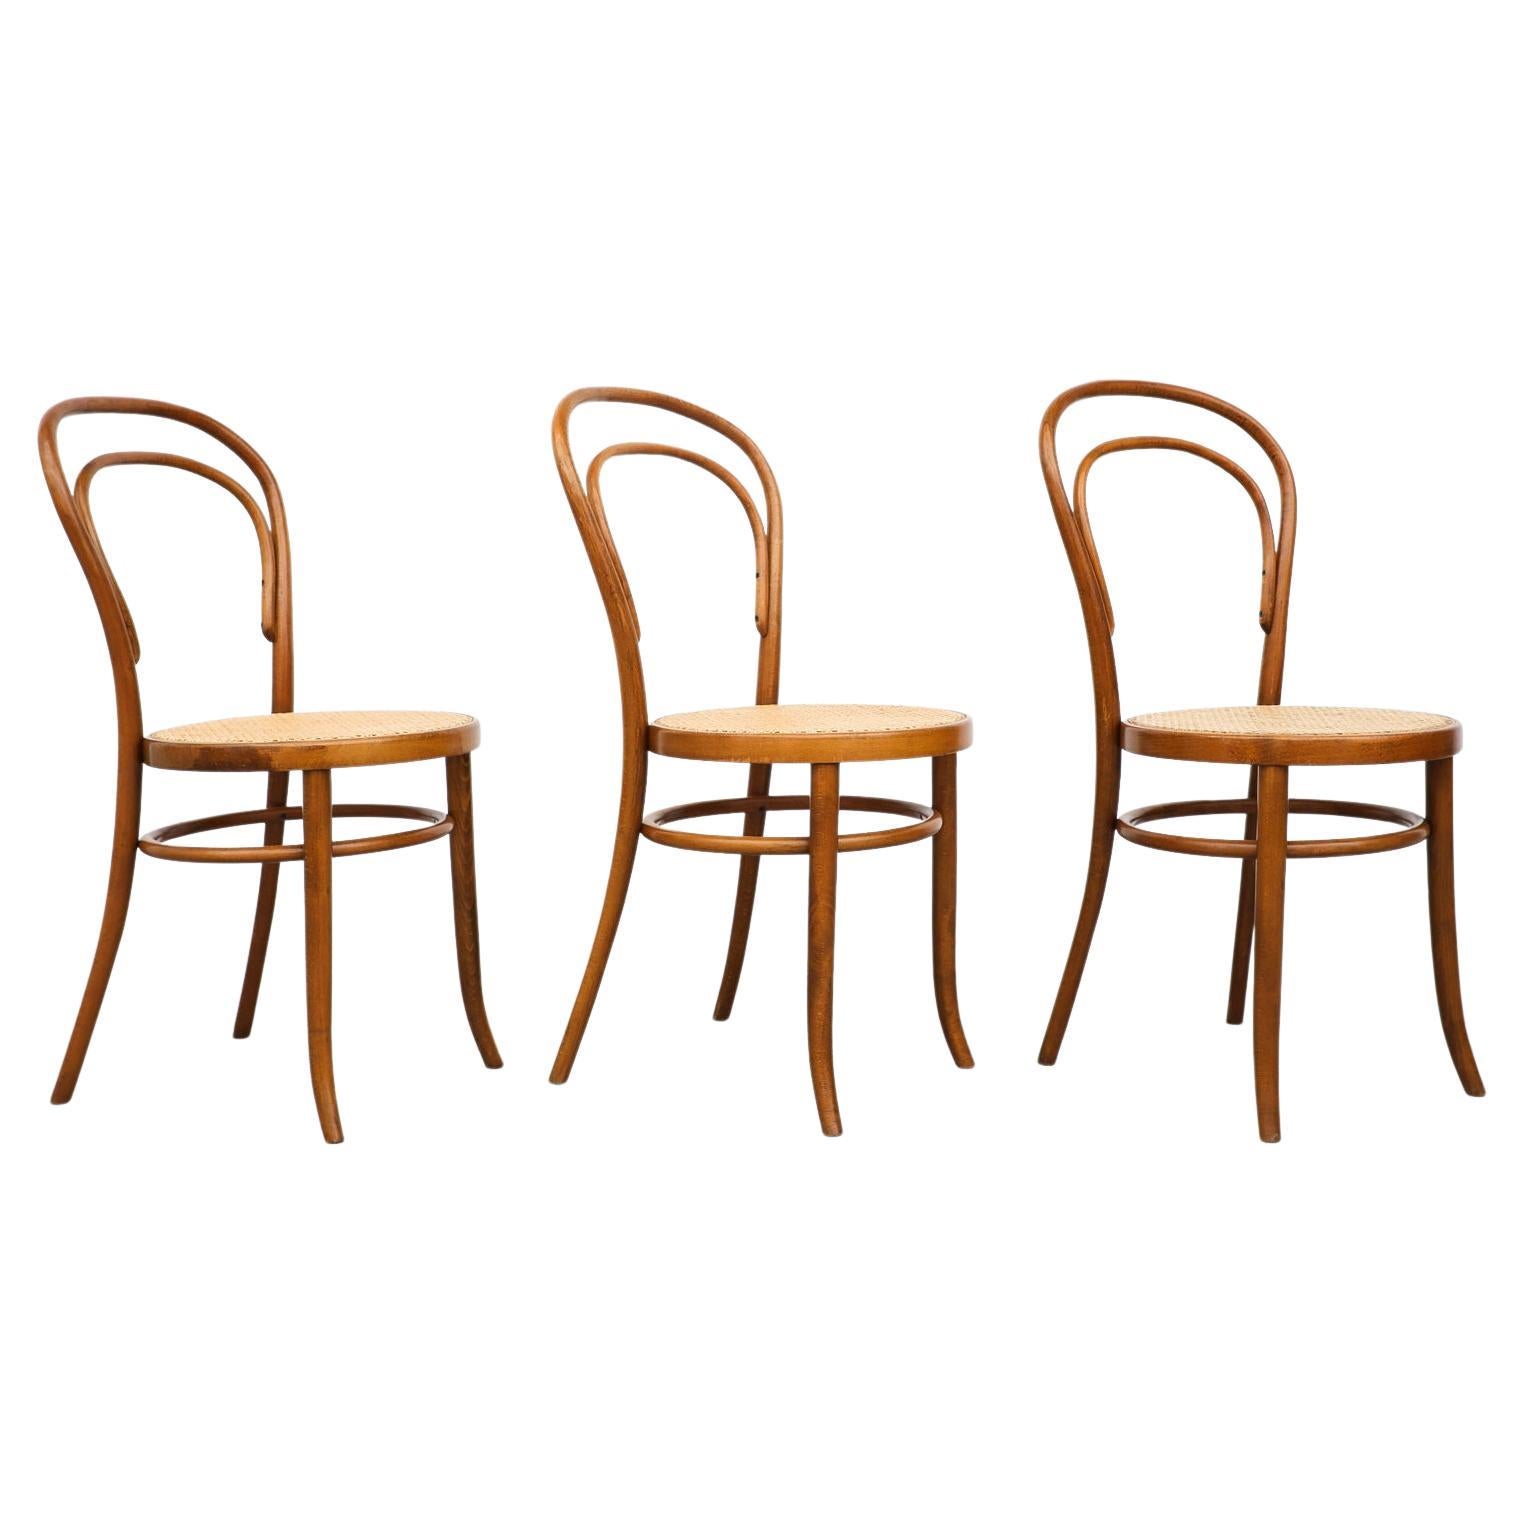 Thonet No. 14 Bentwood and Cane Cafe Chairs